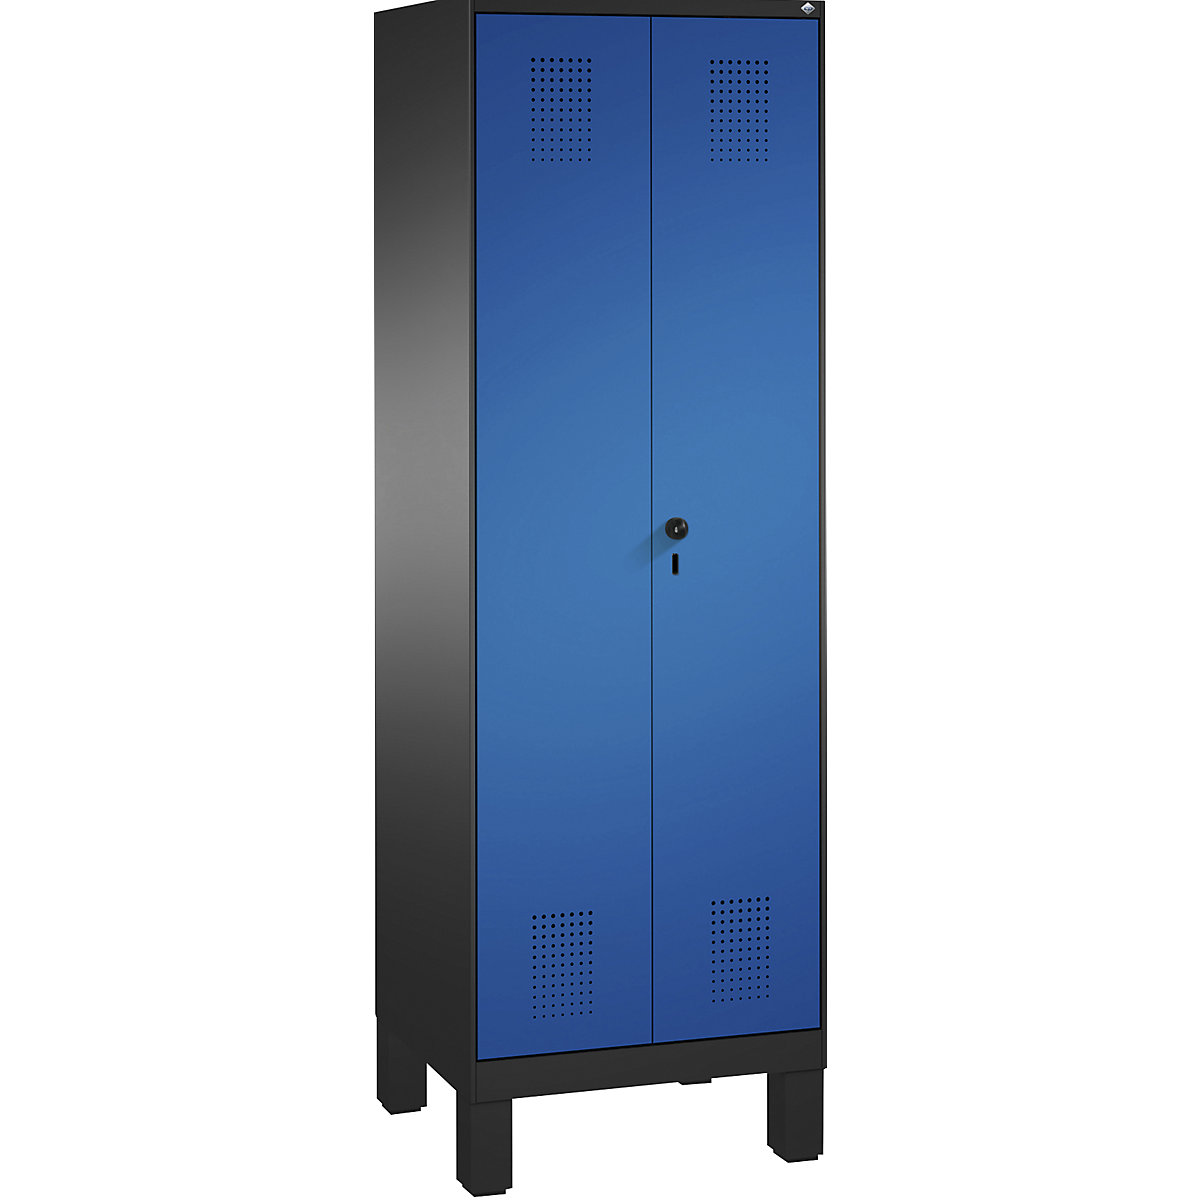 EVOLO laundry cupboard / cloakroom locker – C+P, 4 shelves, clothes rail, compartments 2 x 300 mm, with feet, black grey / gentian blue-14